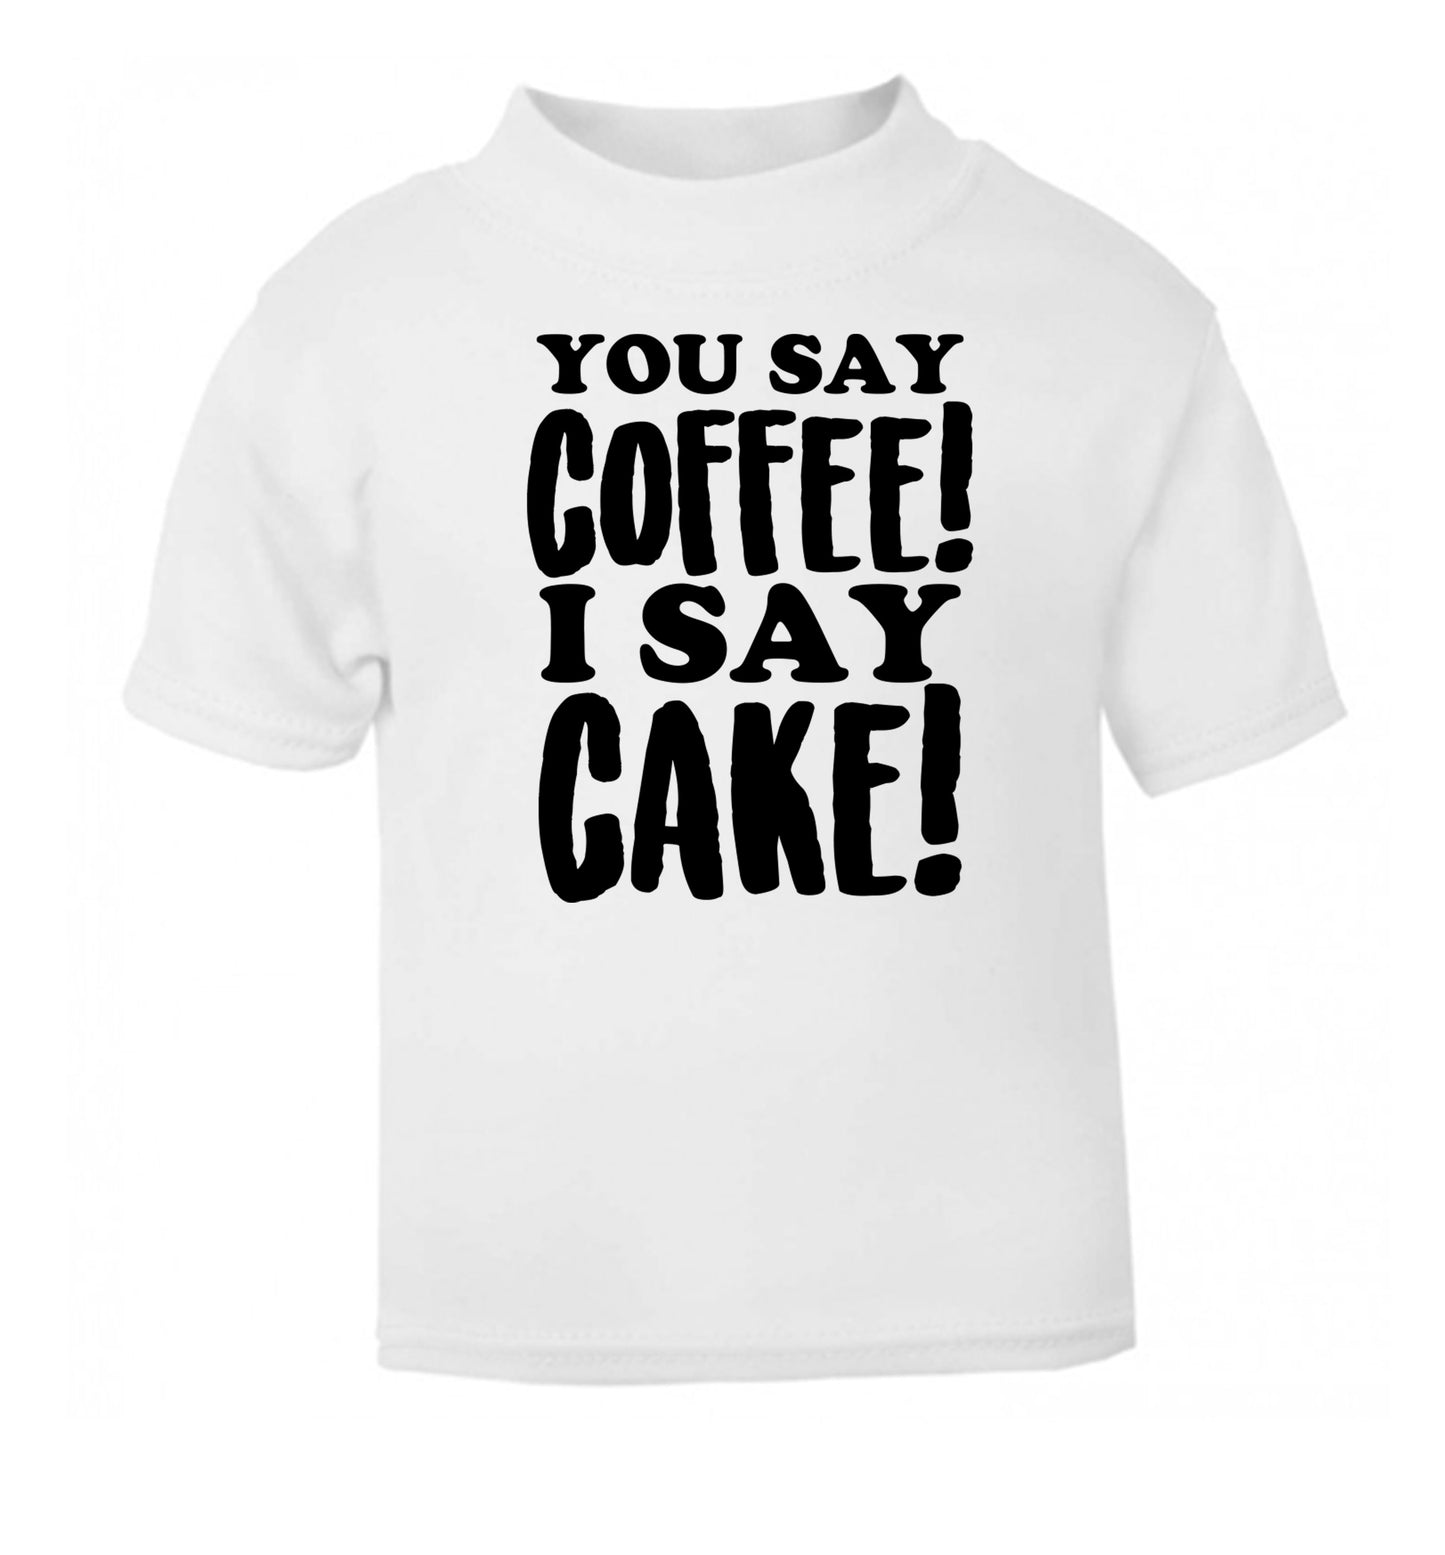 You say coffee I say cake! white Baby Toddler Tshirt 2 Years